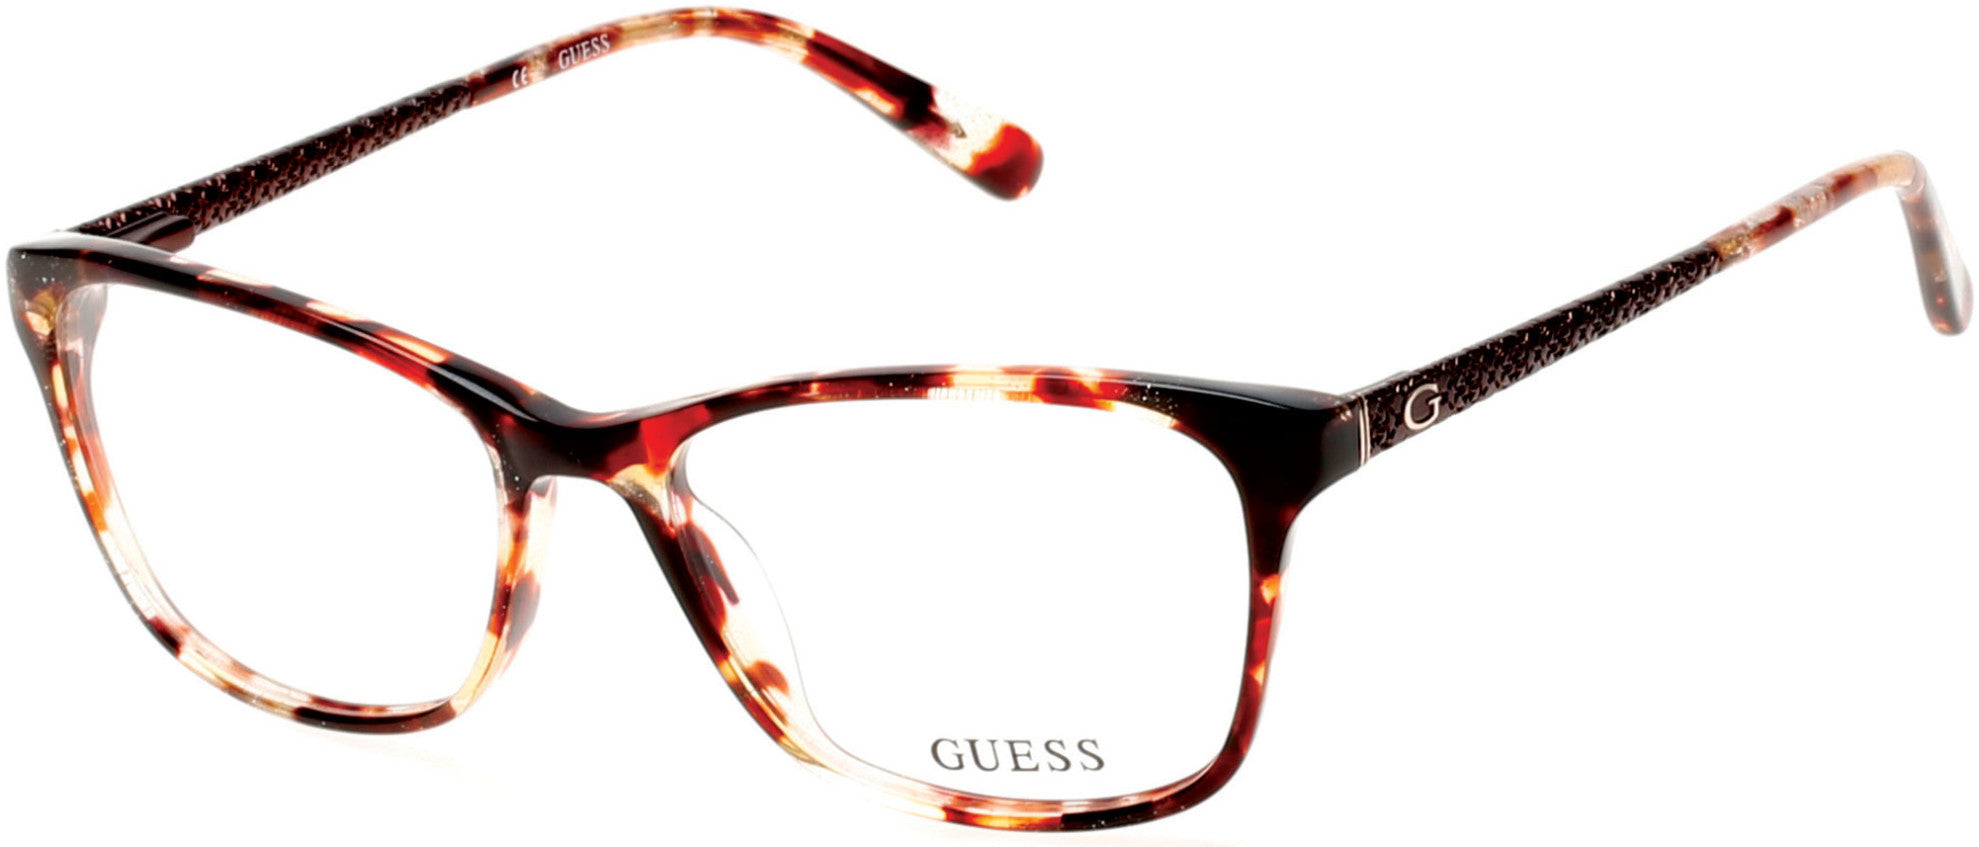 Guess GU2500 Square Eyeglasses 047-047 - Light Brown/other